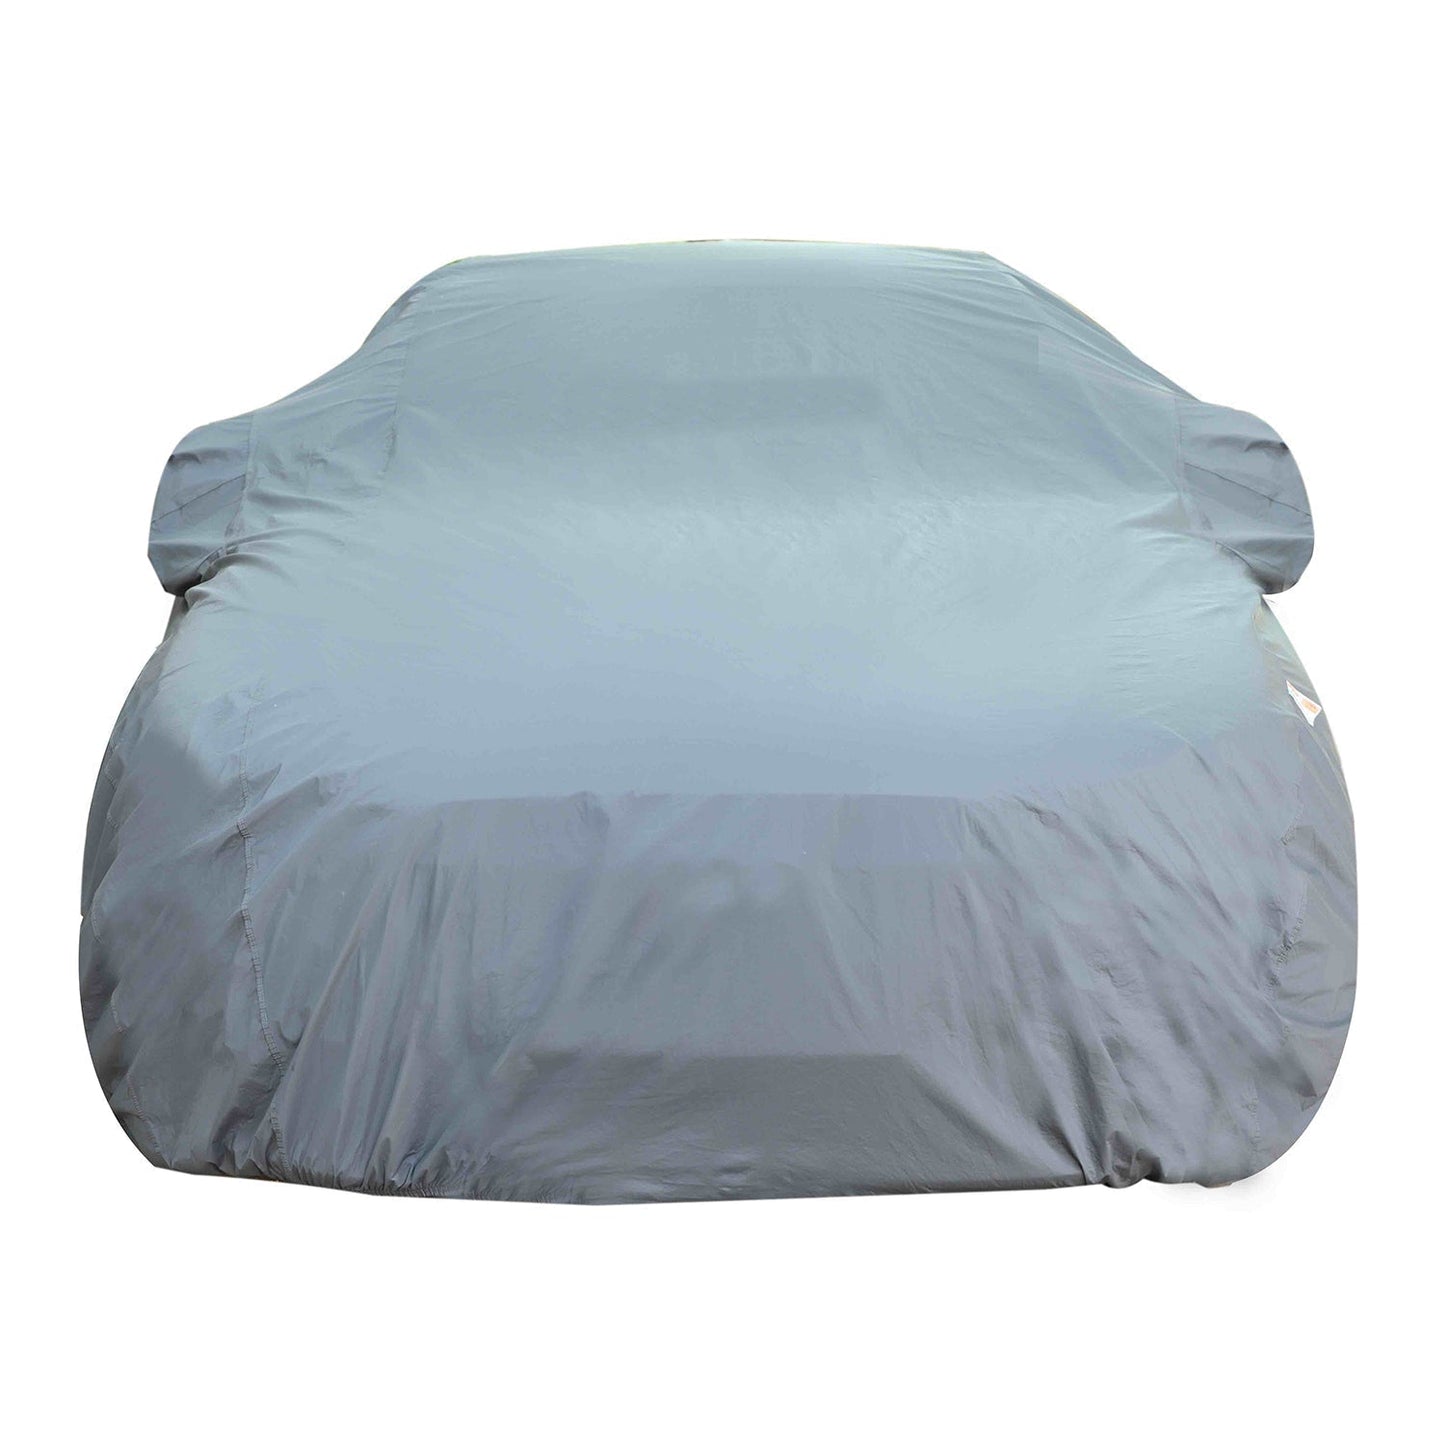 Oshotto Dark Grey 100% Anti Reflective, dustproof and Water Proof Car Body Cover with Mirror Pockets For Toyota Urban Cruiser Hyryder 2022 Onwards